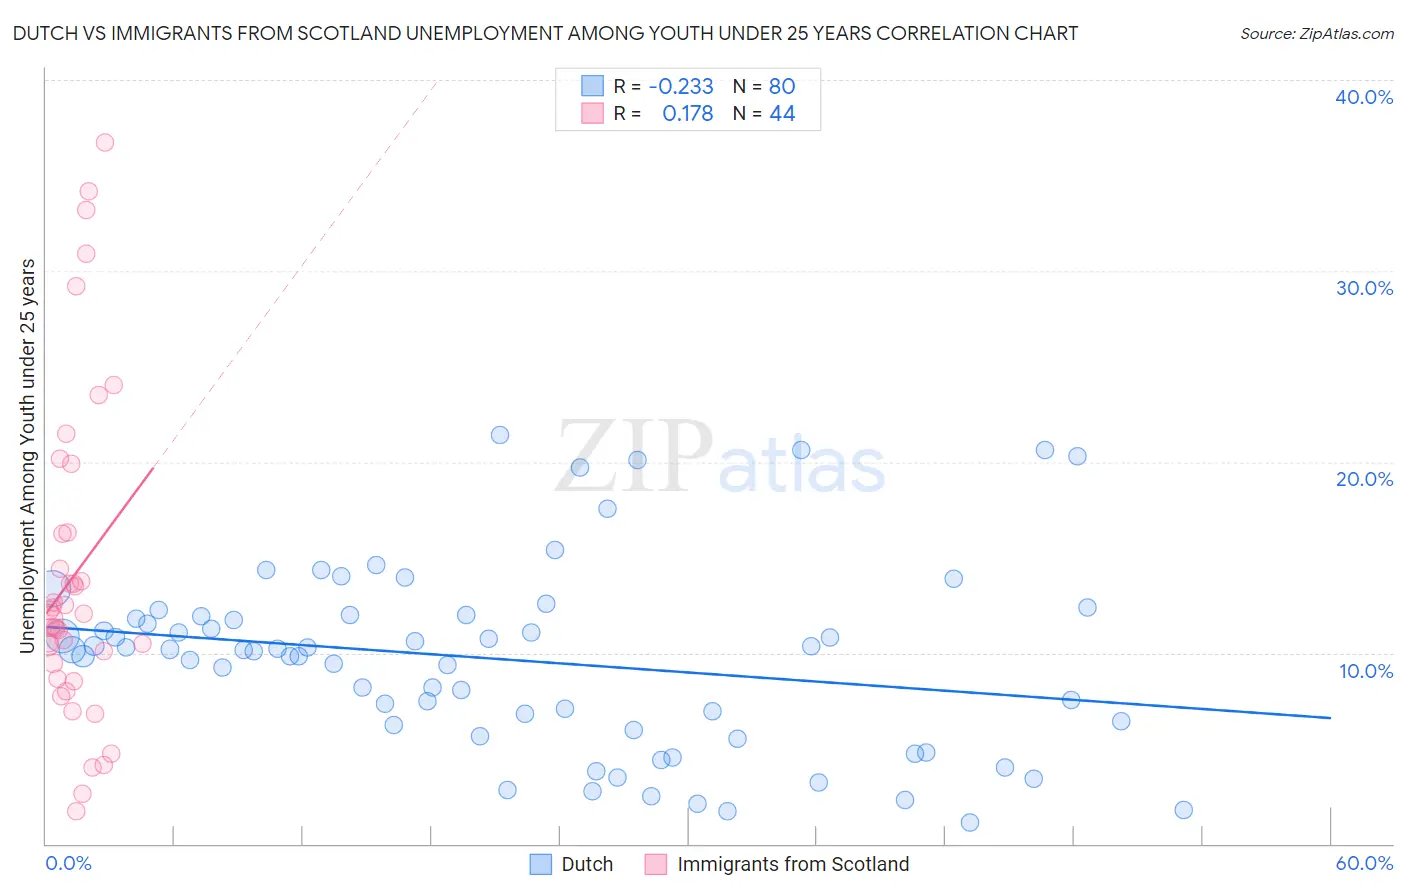 Dutch vs Immigrants from Scotland Unemployment Among Youth under 25 years